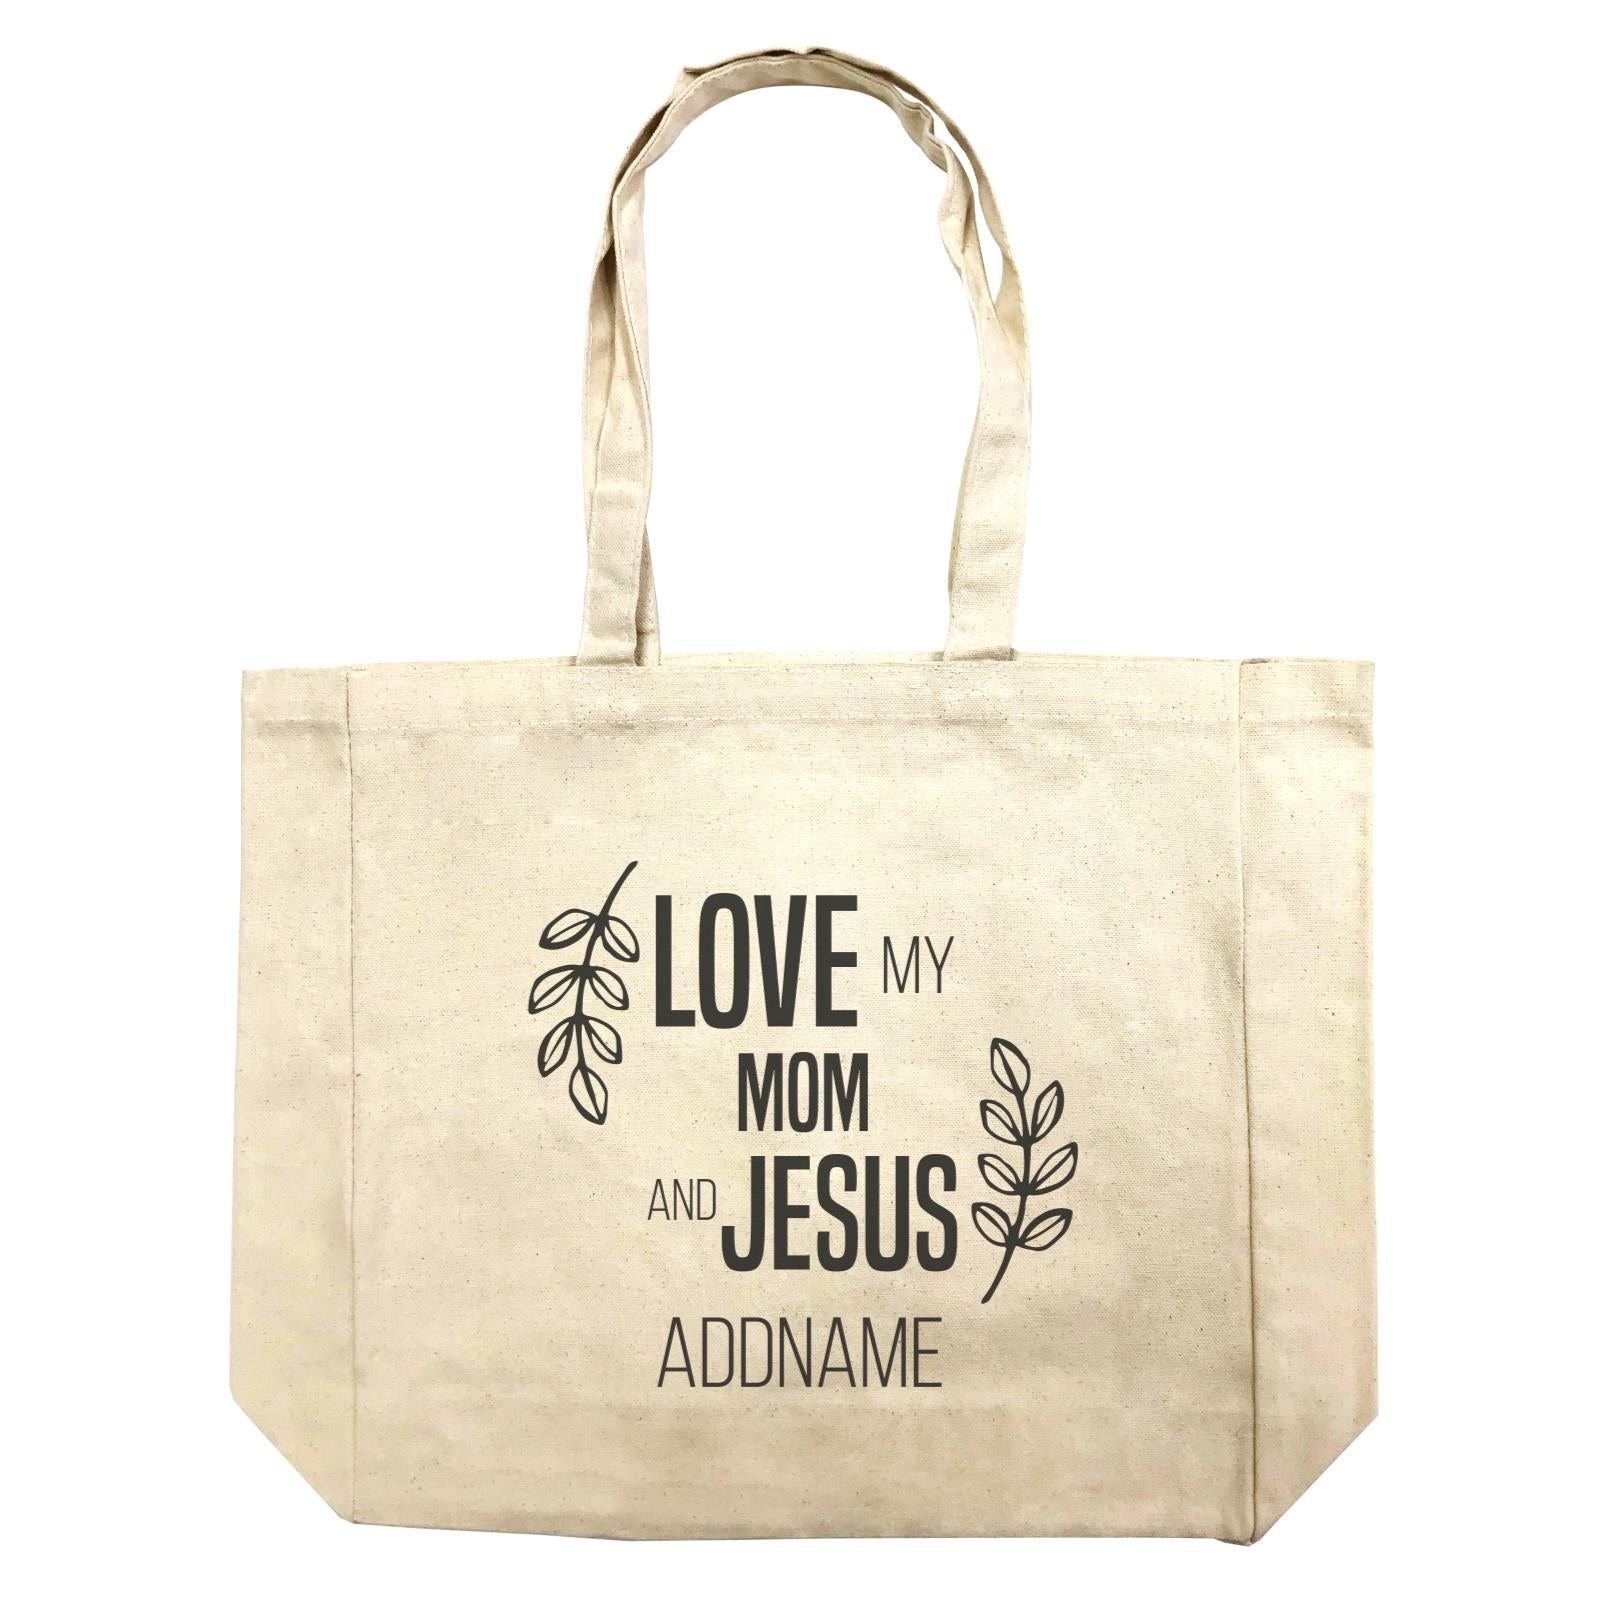 Christian Series Love My Mom And Jesus Addname Shopping Bag